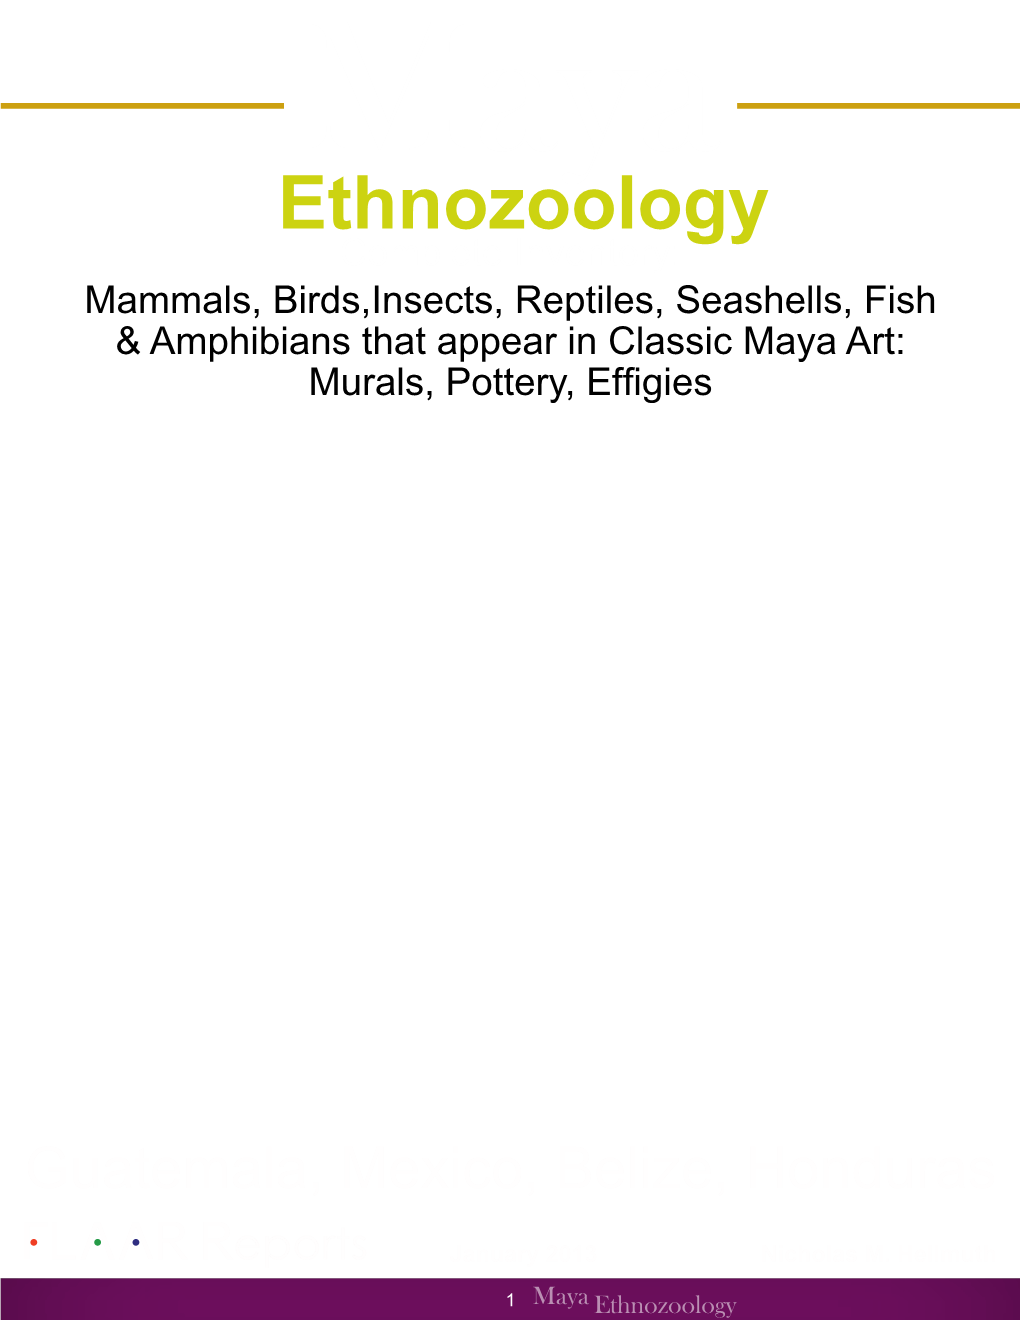 Ethnozoology Complete Inventory: Mammals, Birds,Insects, Reptiles, Seashells, Fish & Amphibians That Appear in Classic Maya Art: Murals, Pottery, Effigies